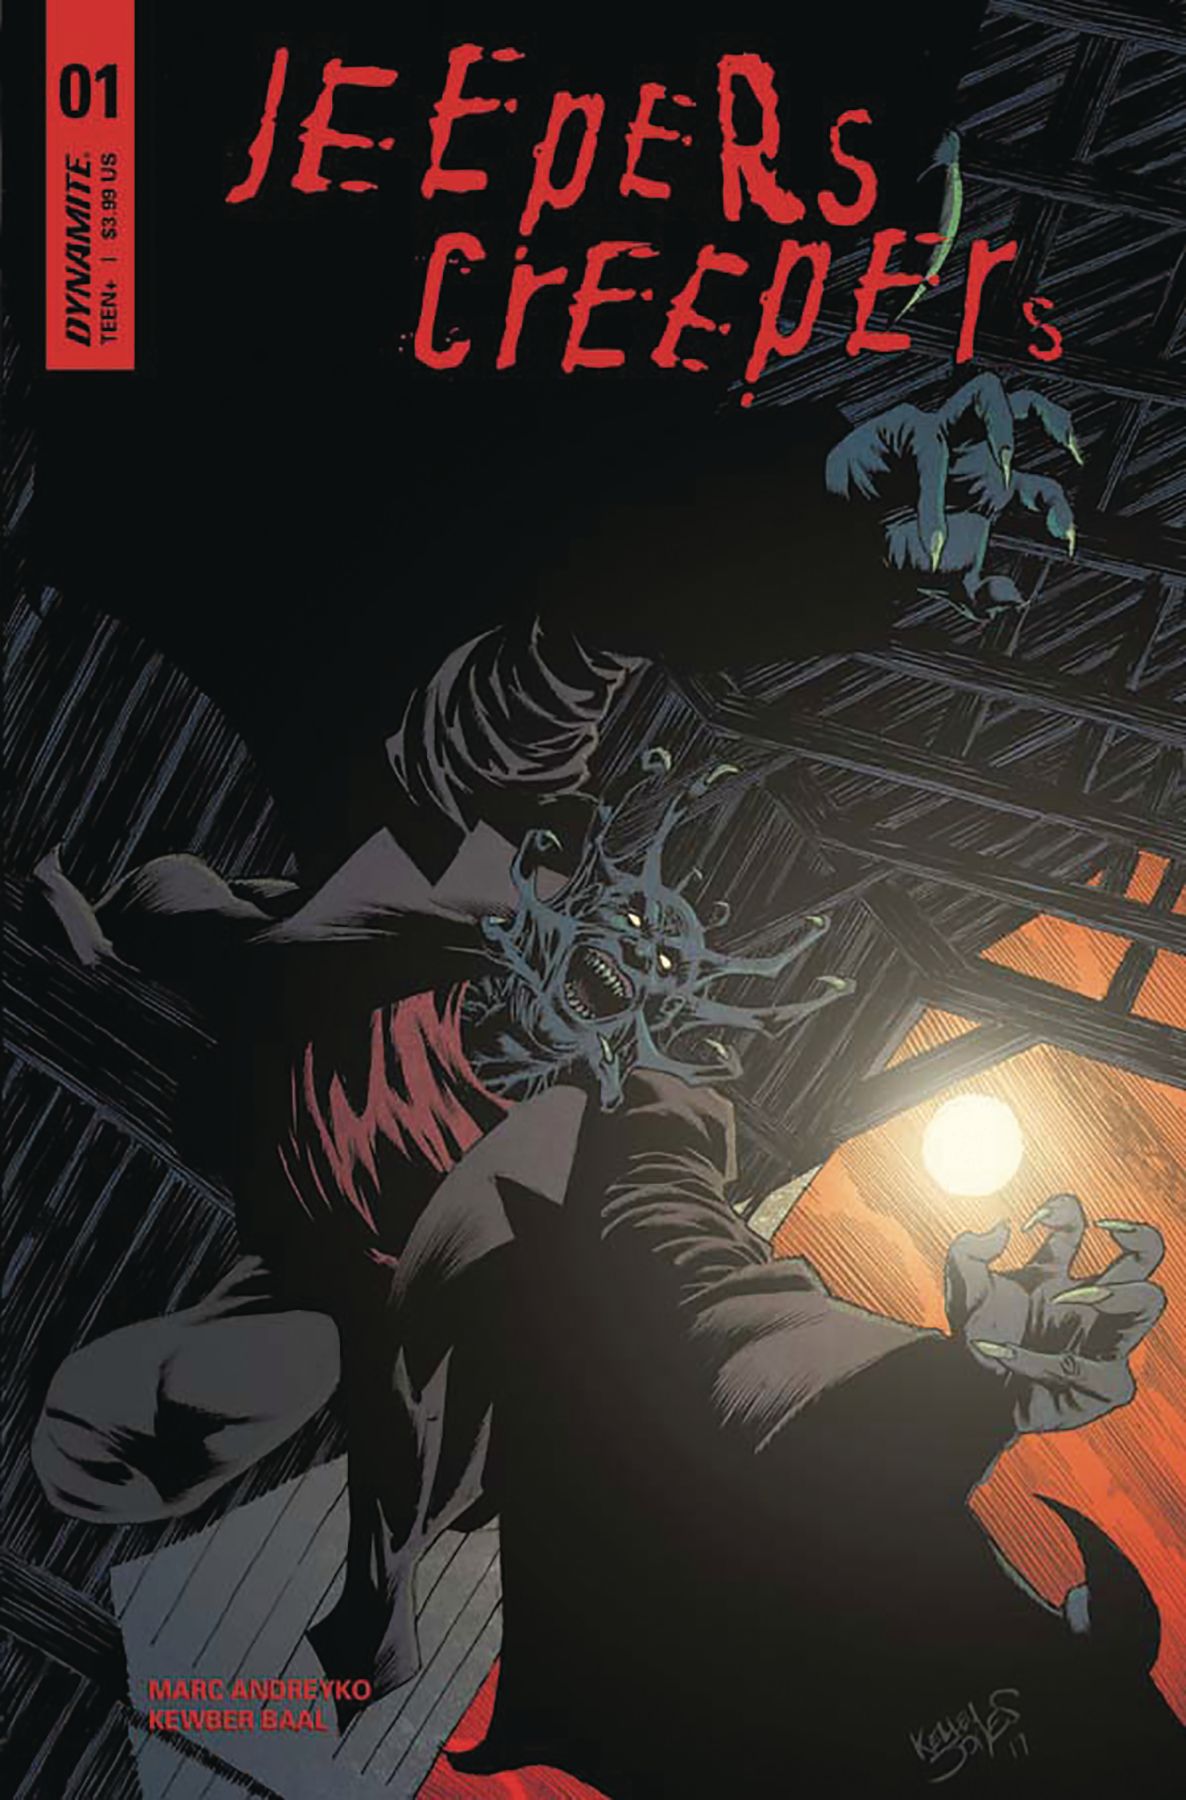 Jeepers Creepers #1 Comic